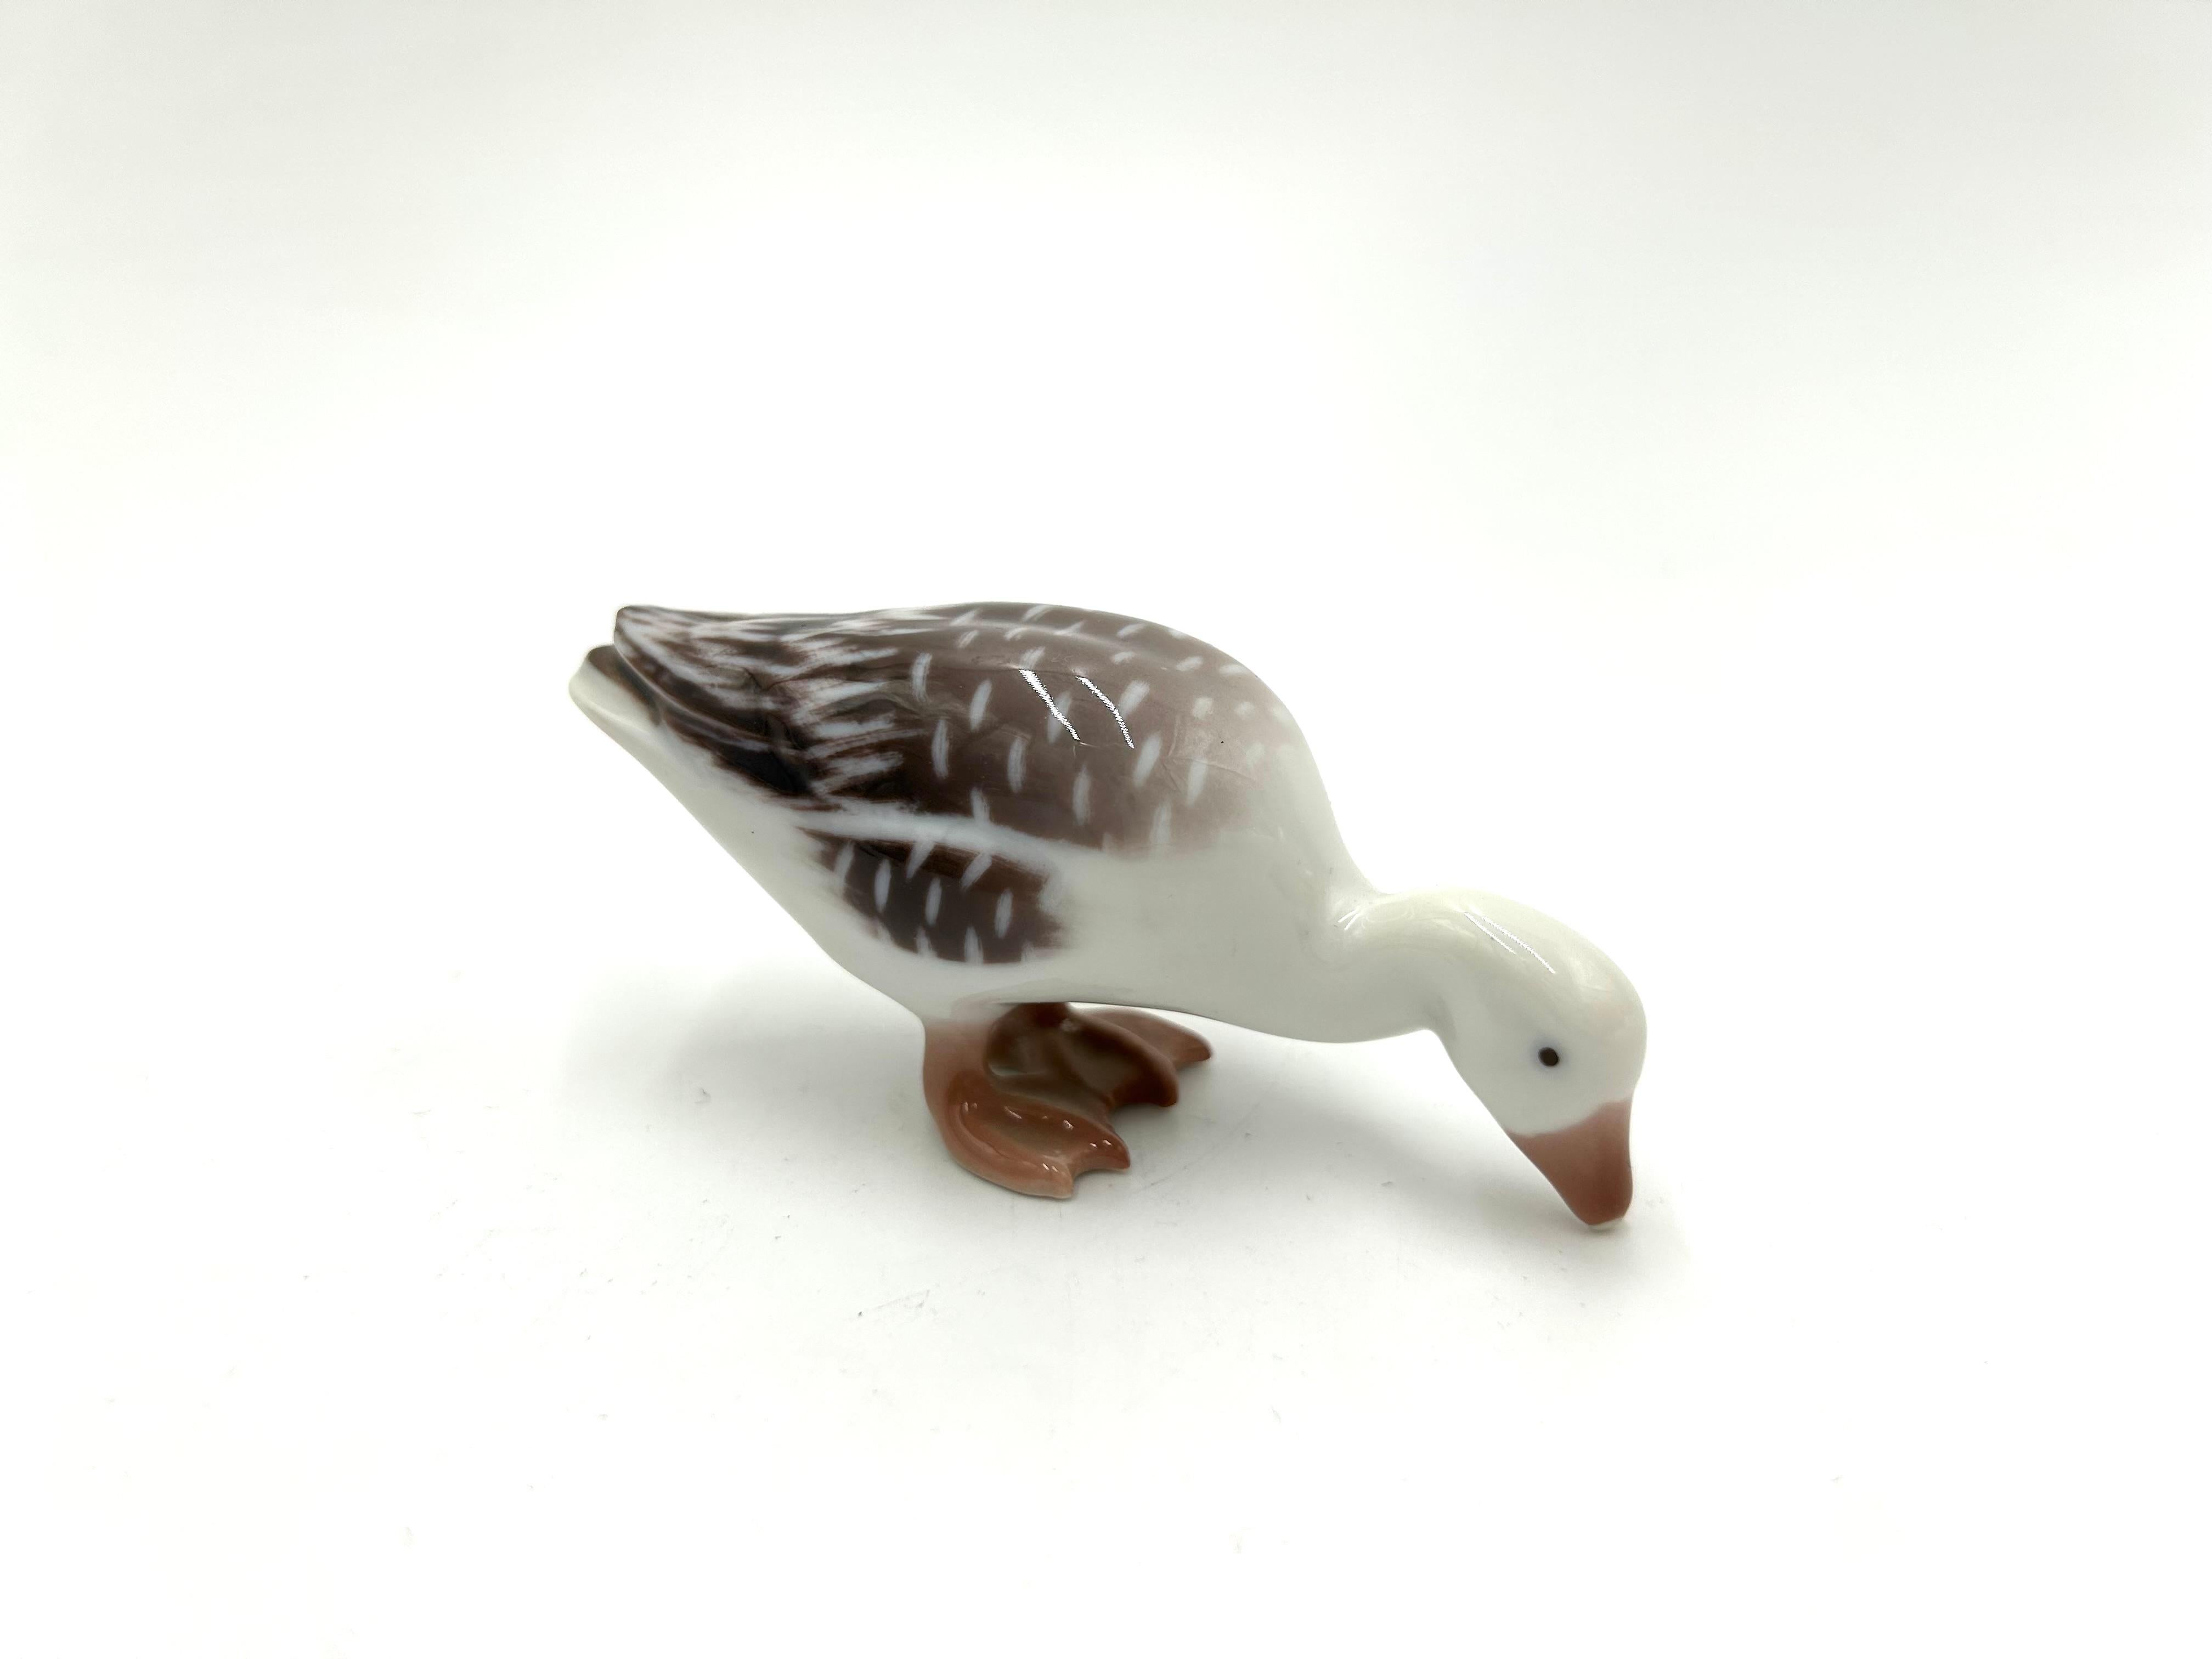 Porcelain small goose figurine.

Produced by the Danish manufactory Bing & Grondahl

The mark is used in the 1980s.

Very good condition without damage

Measures : Height: 4cm

Width: 6cm

Depth: 3cm.